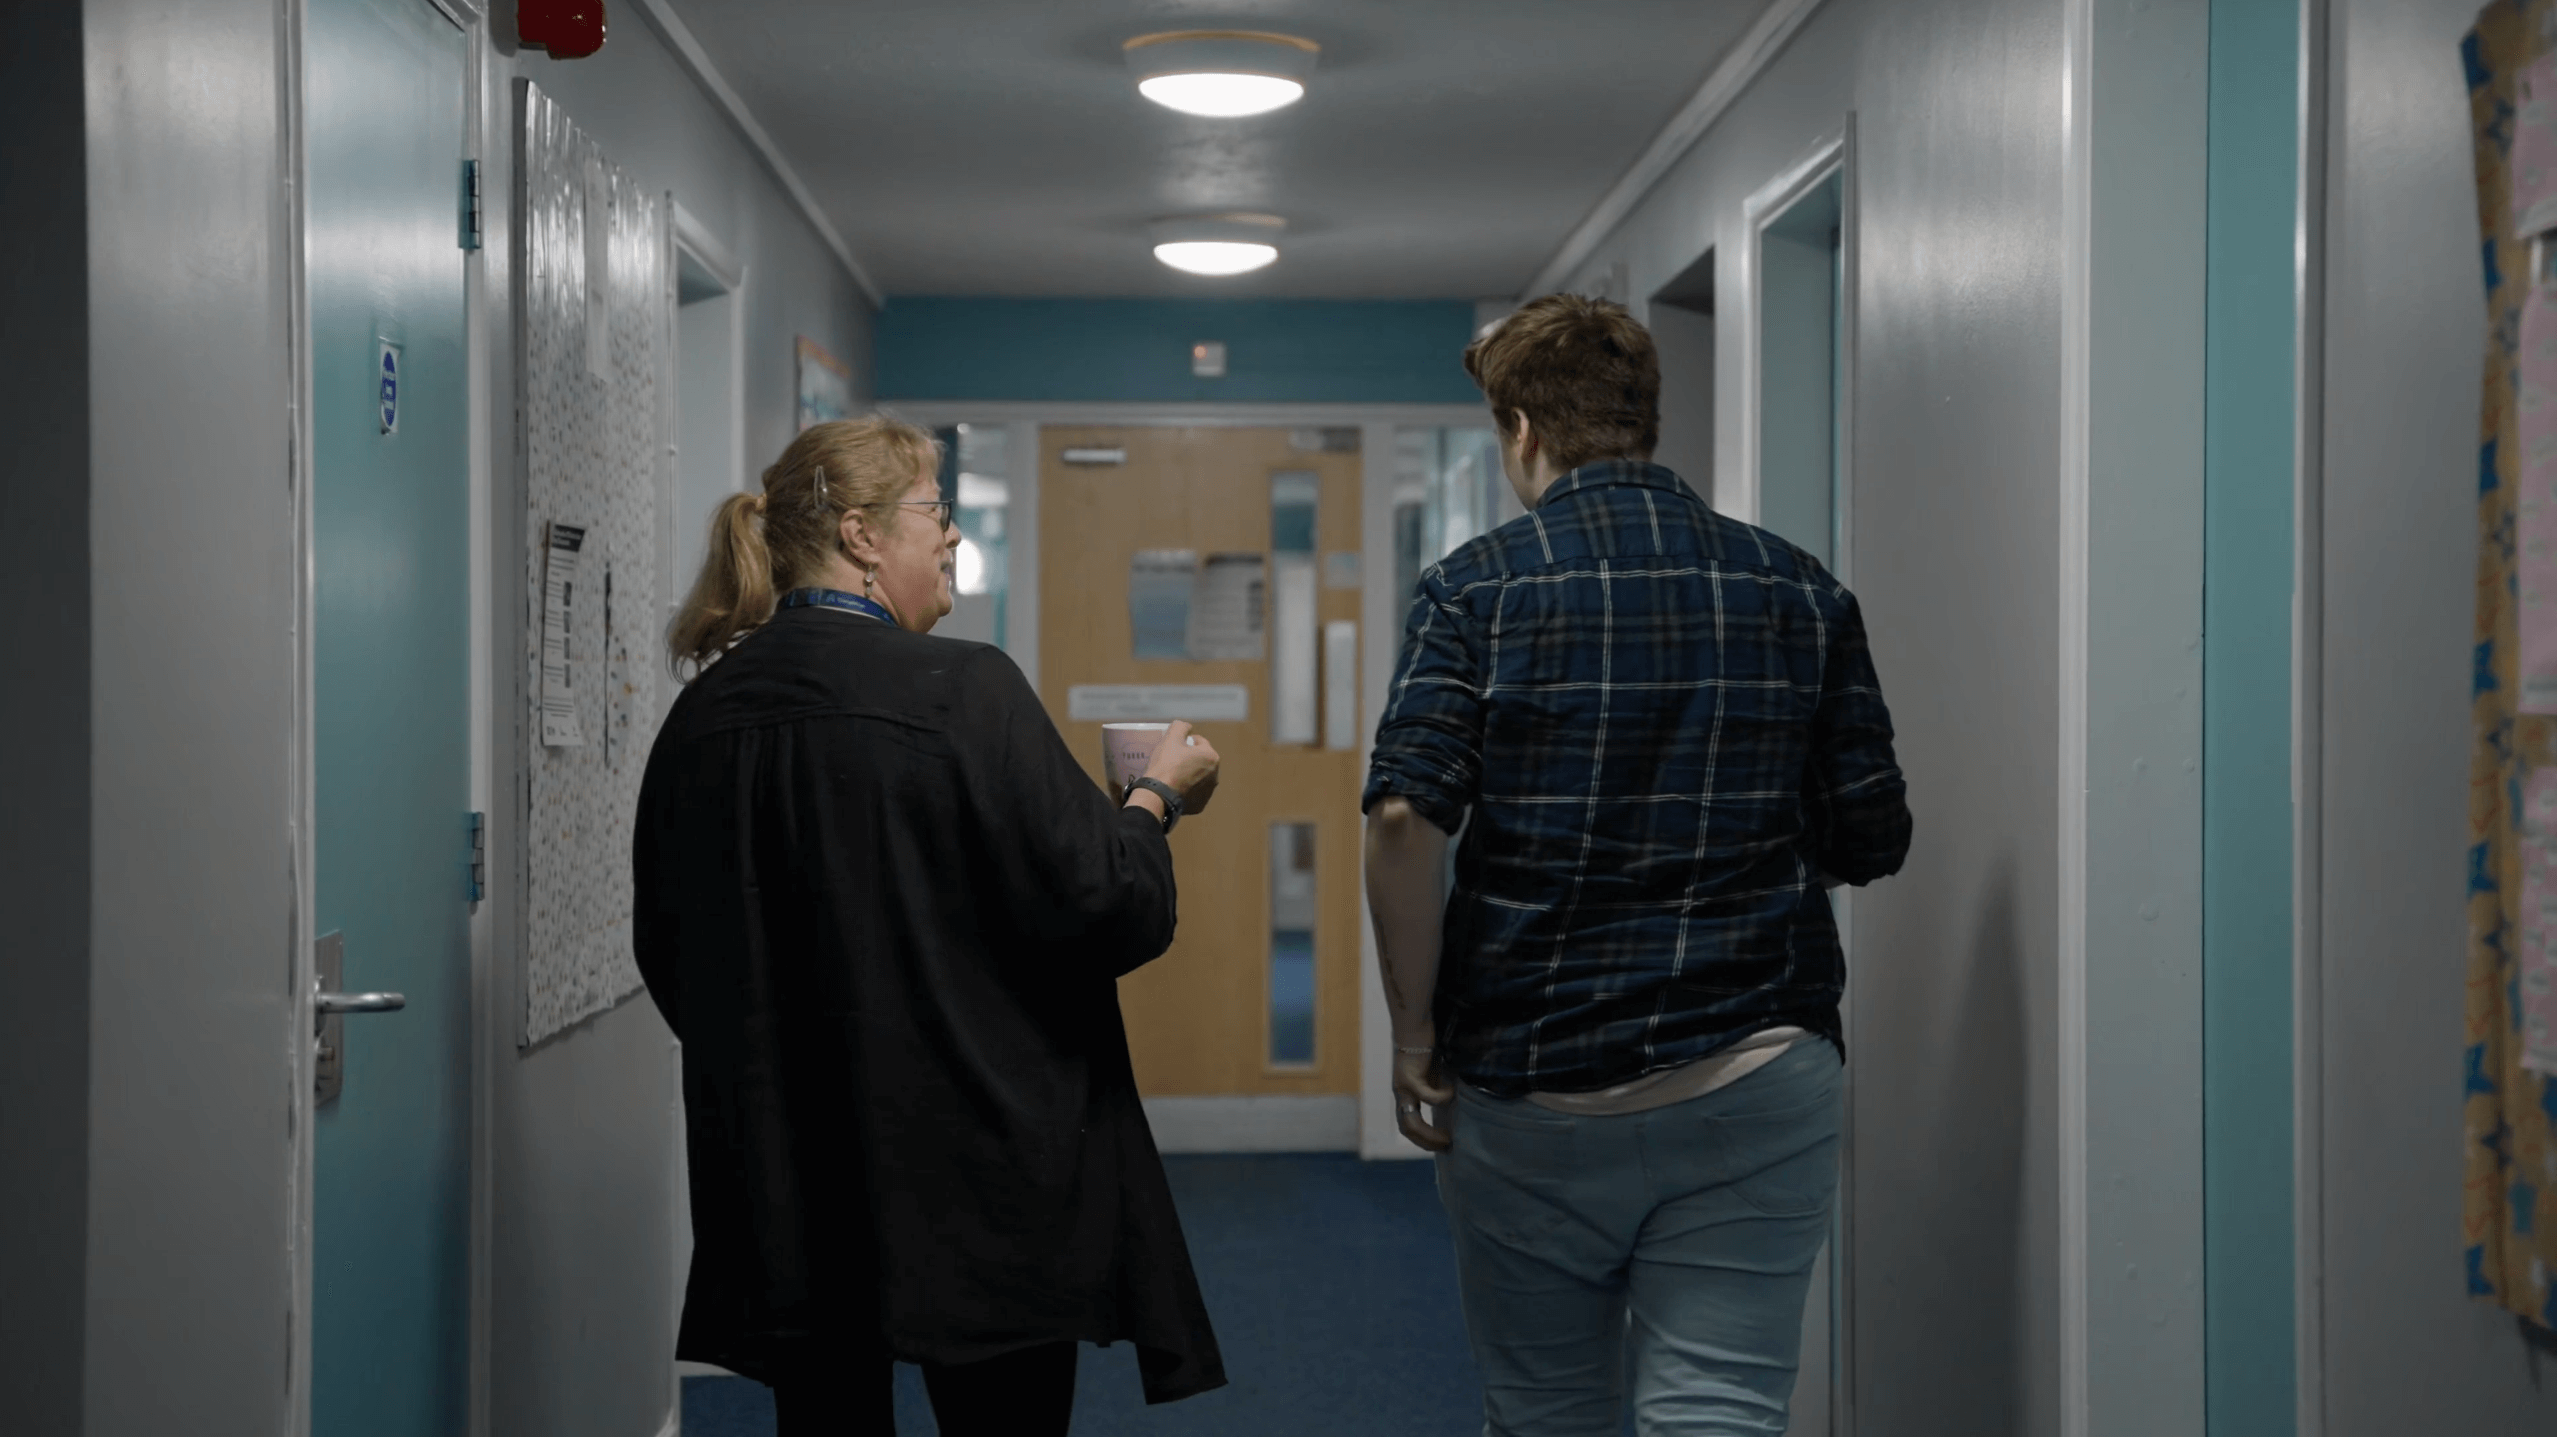 staff member and supported living resident walking down corridor